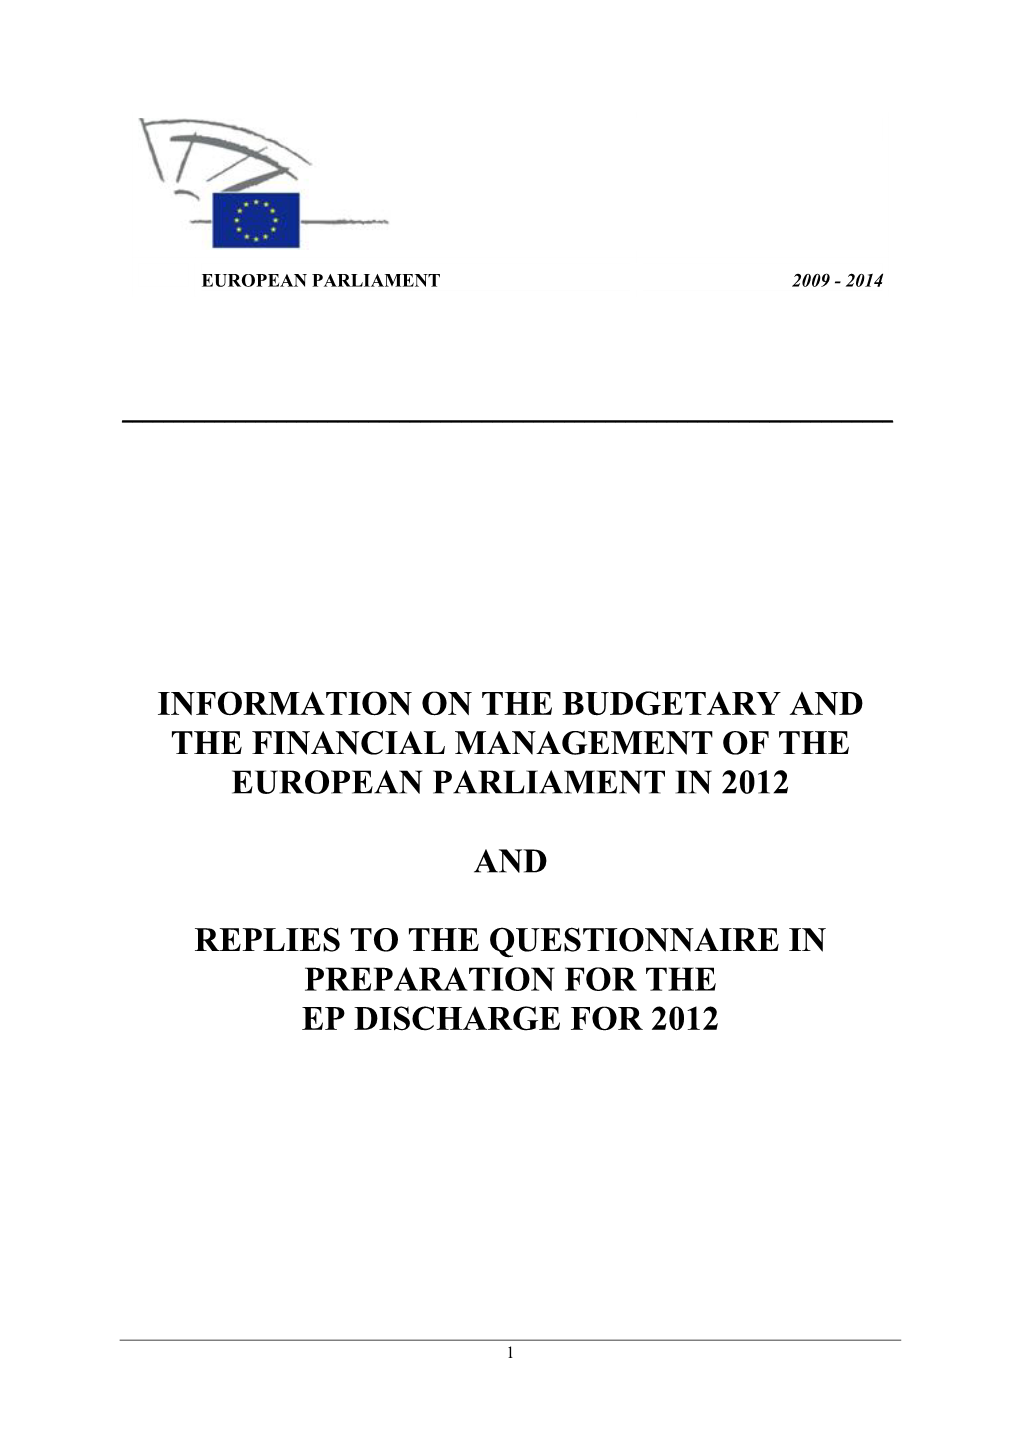 Information on the Budgetary and the Financial Management of the European Parliament in 2012